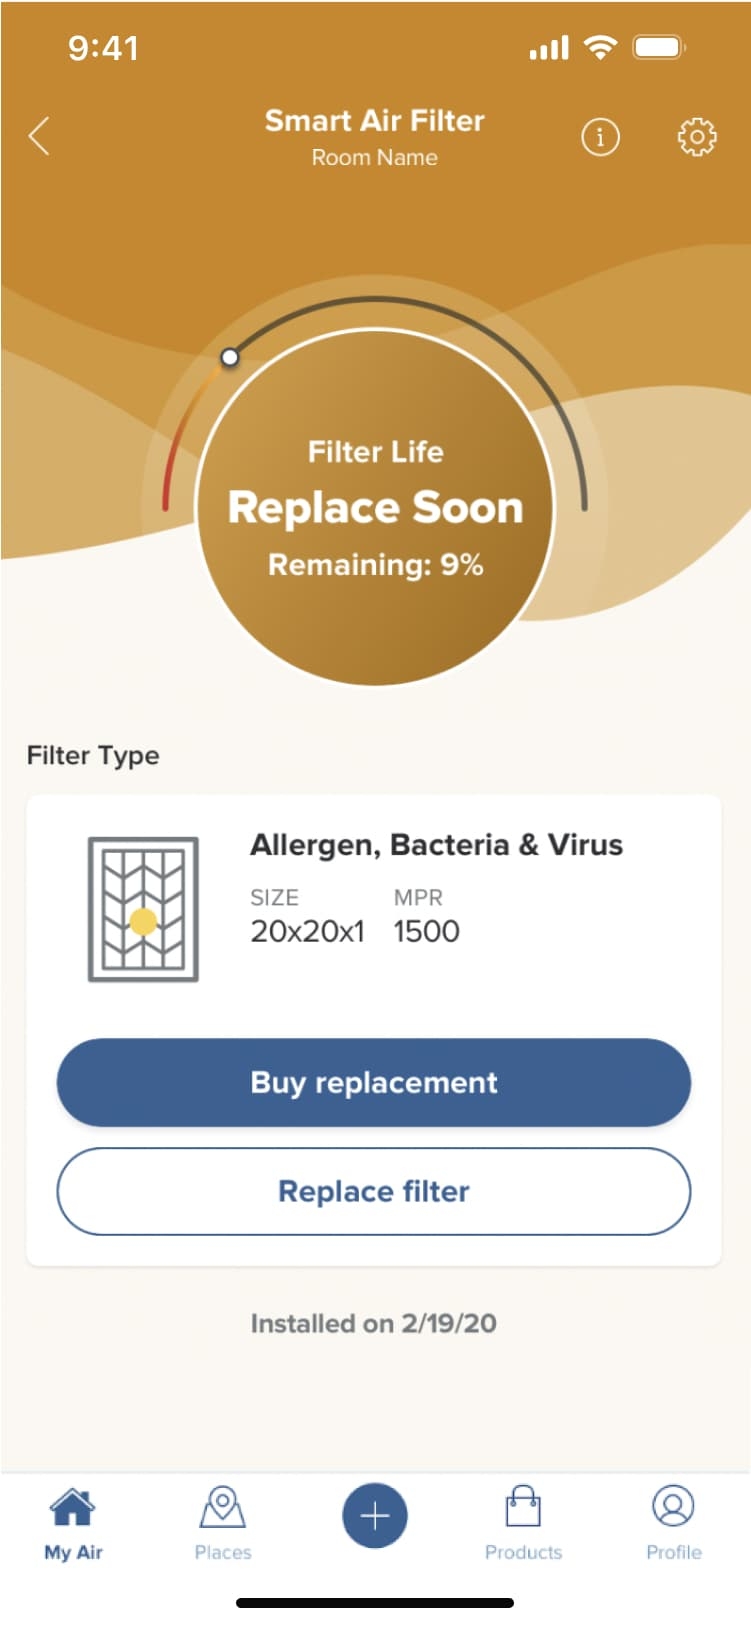 A smartphone screen displays the 3M Filtrete app indicating a smart air filter's life is at 5% and needs replacement soon. Options to buy a replacement or replace the filter are shown.